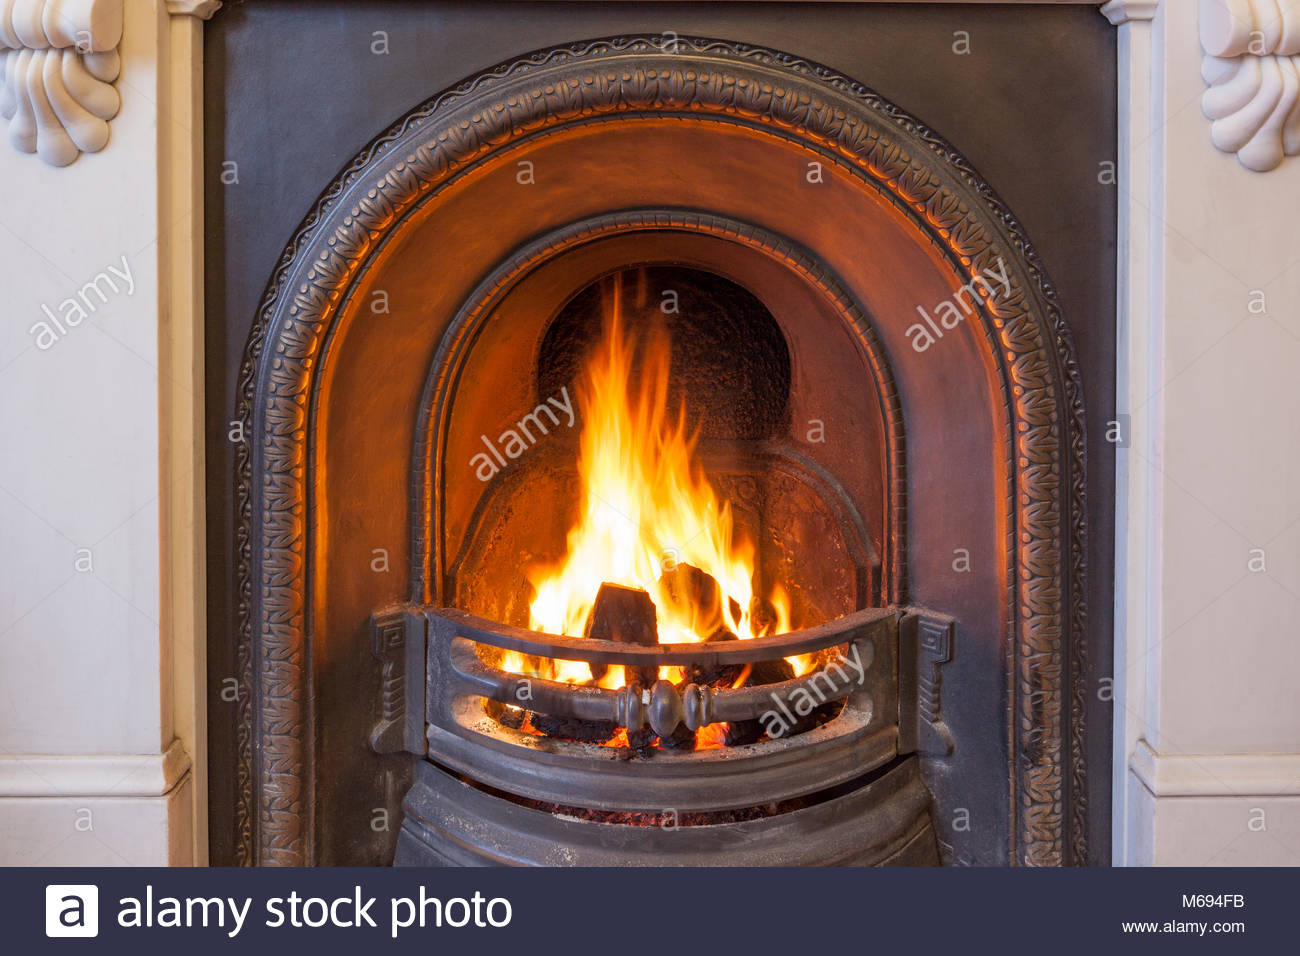 a roaring coal fire in a cast iron grate set in a marble fireplace M694FB